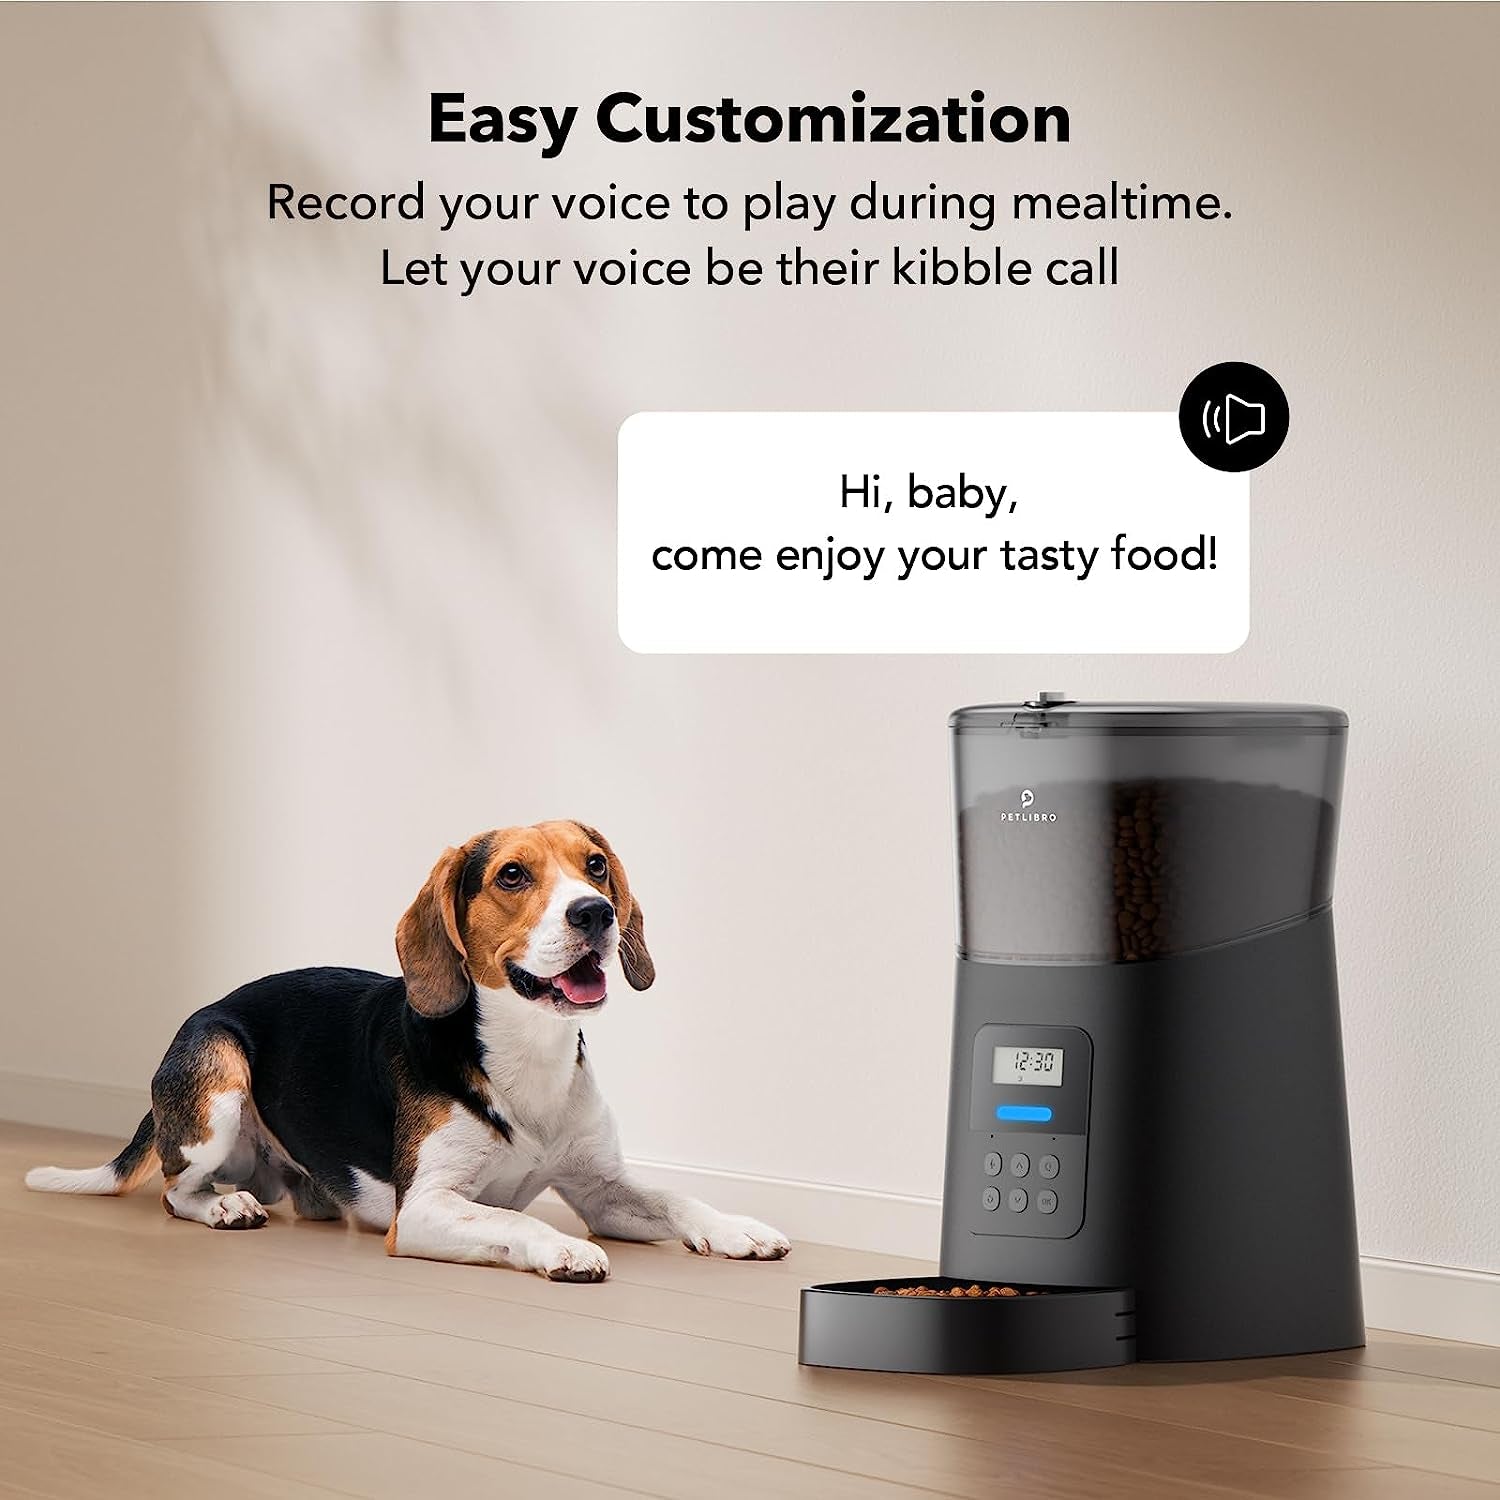 Automatic Dog Feeder 6L Auto Dry Food Dispenser for Large Breed with Lock Lid for Naughty Pet, Timed Cat Feeder Low Food LED Indication with Anti-Clog Design up to 50 Portion & 6 Meals Daily